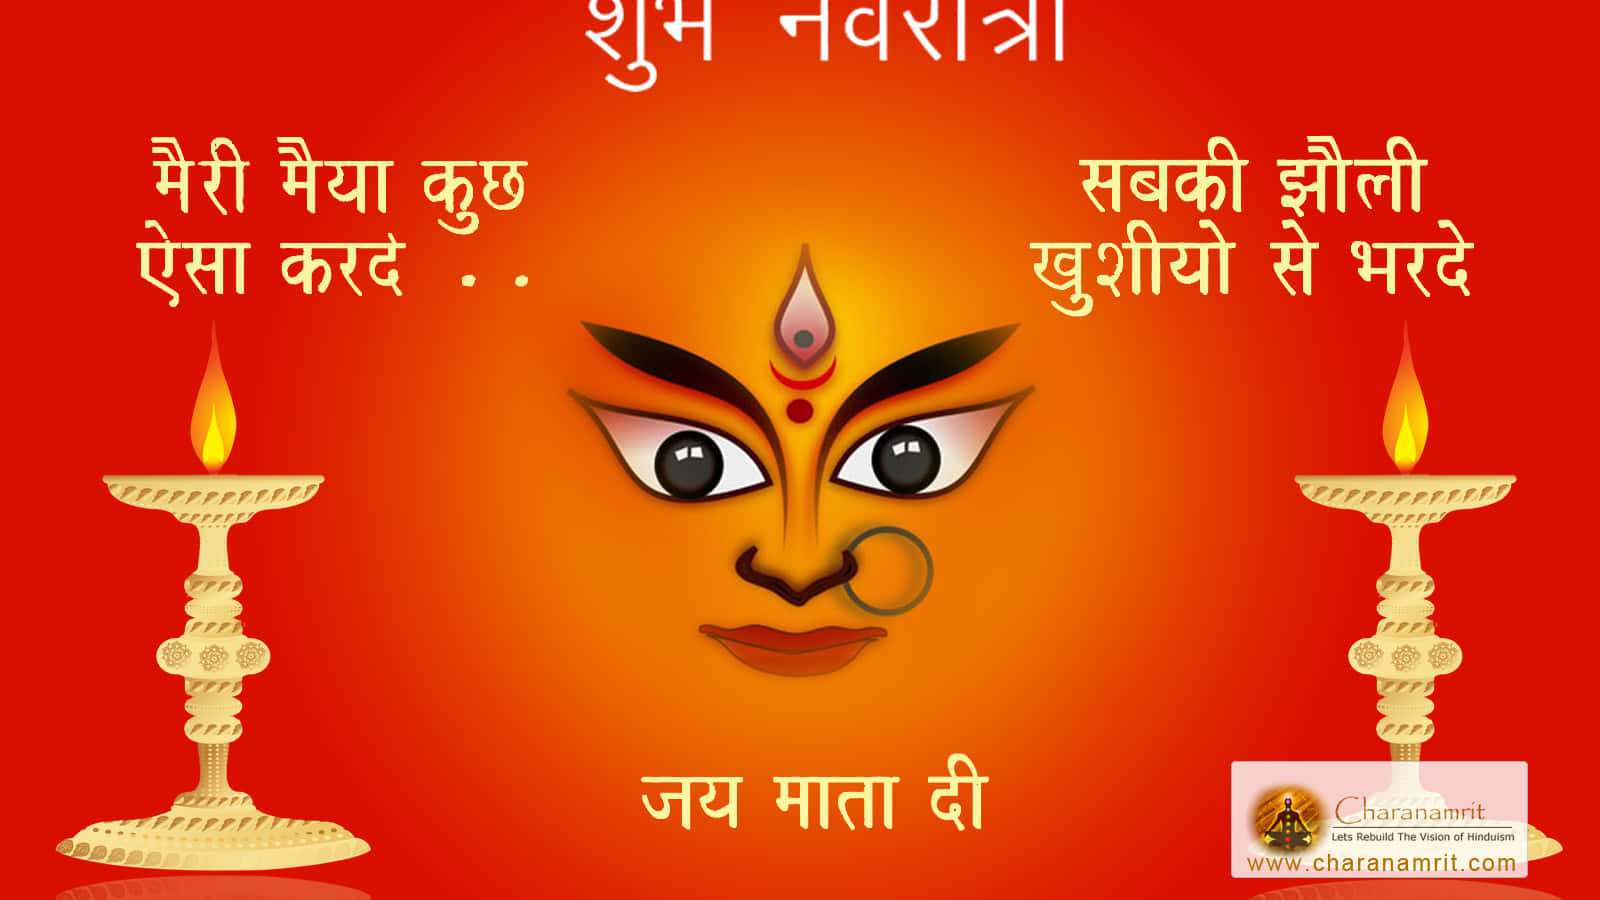 Celebrate the joy and opulence of the Indian festival of Navratri